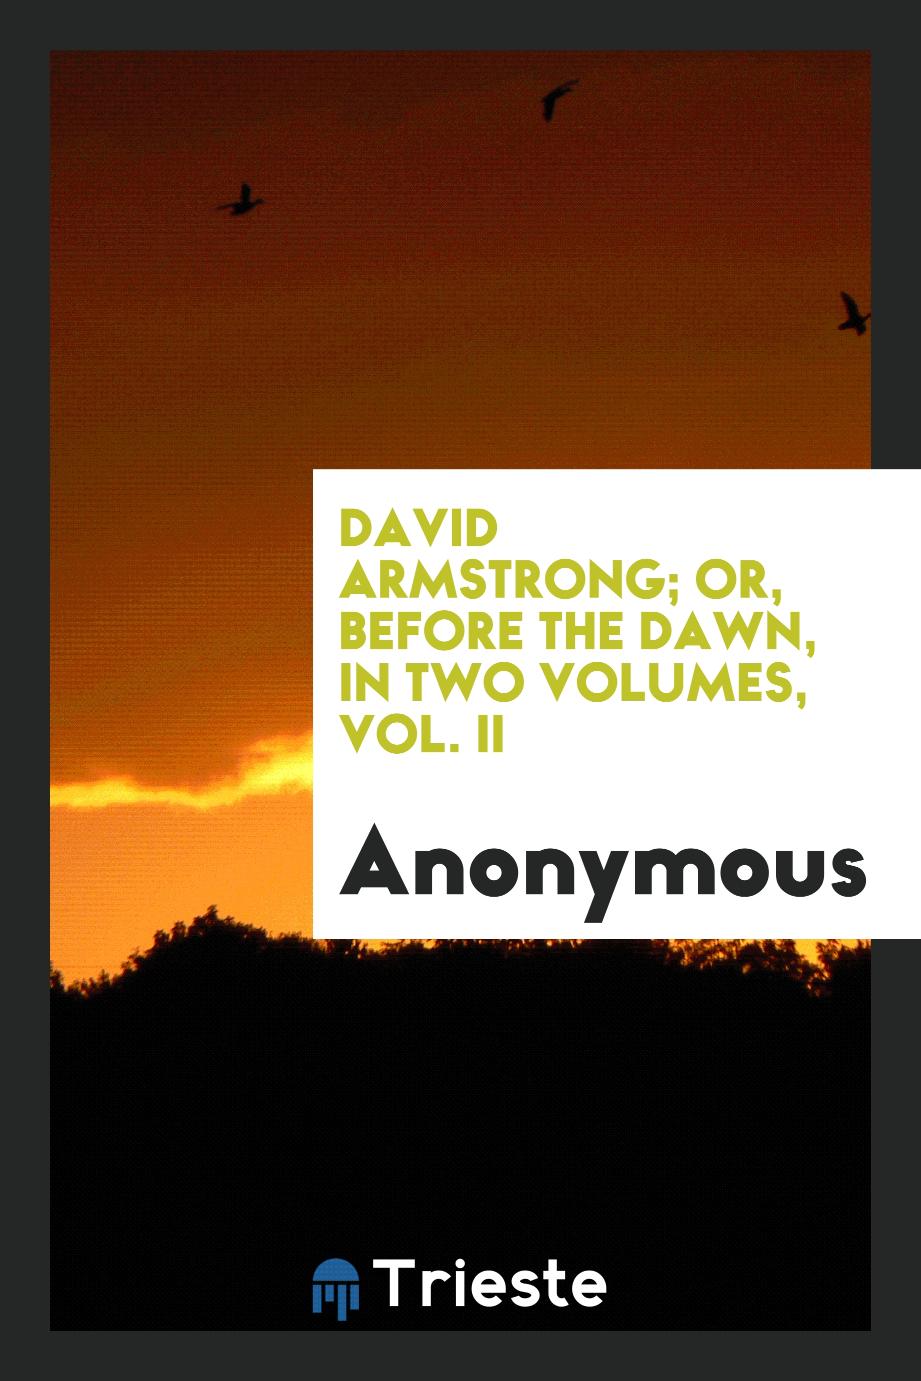 David Armstrong; or, Before the dawn, in two volumes, Vol. II